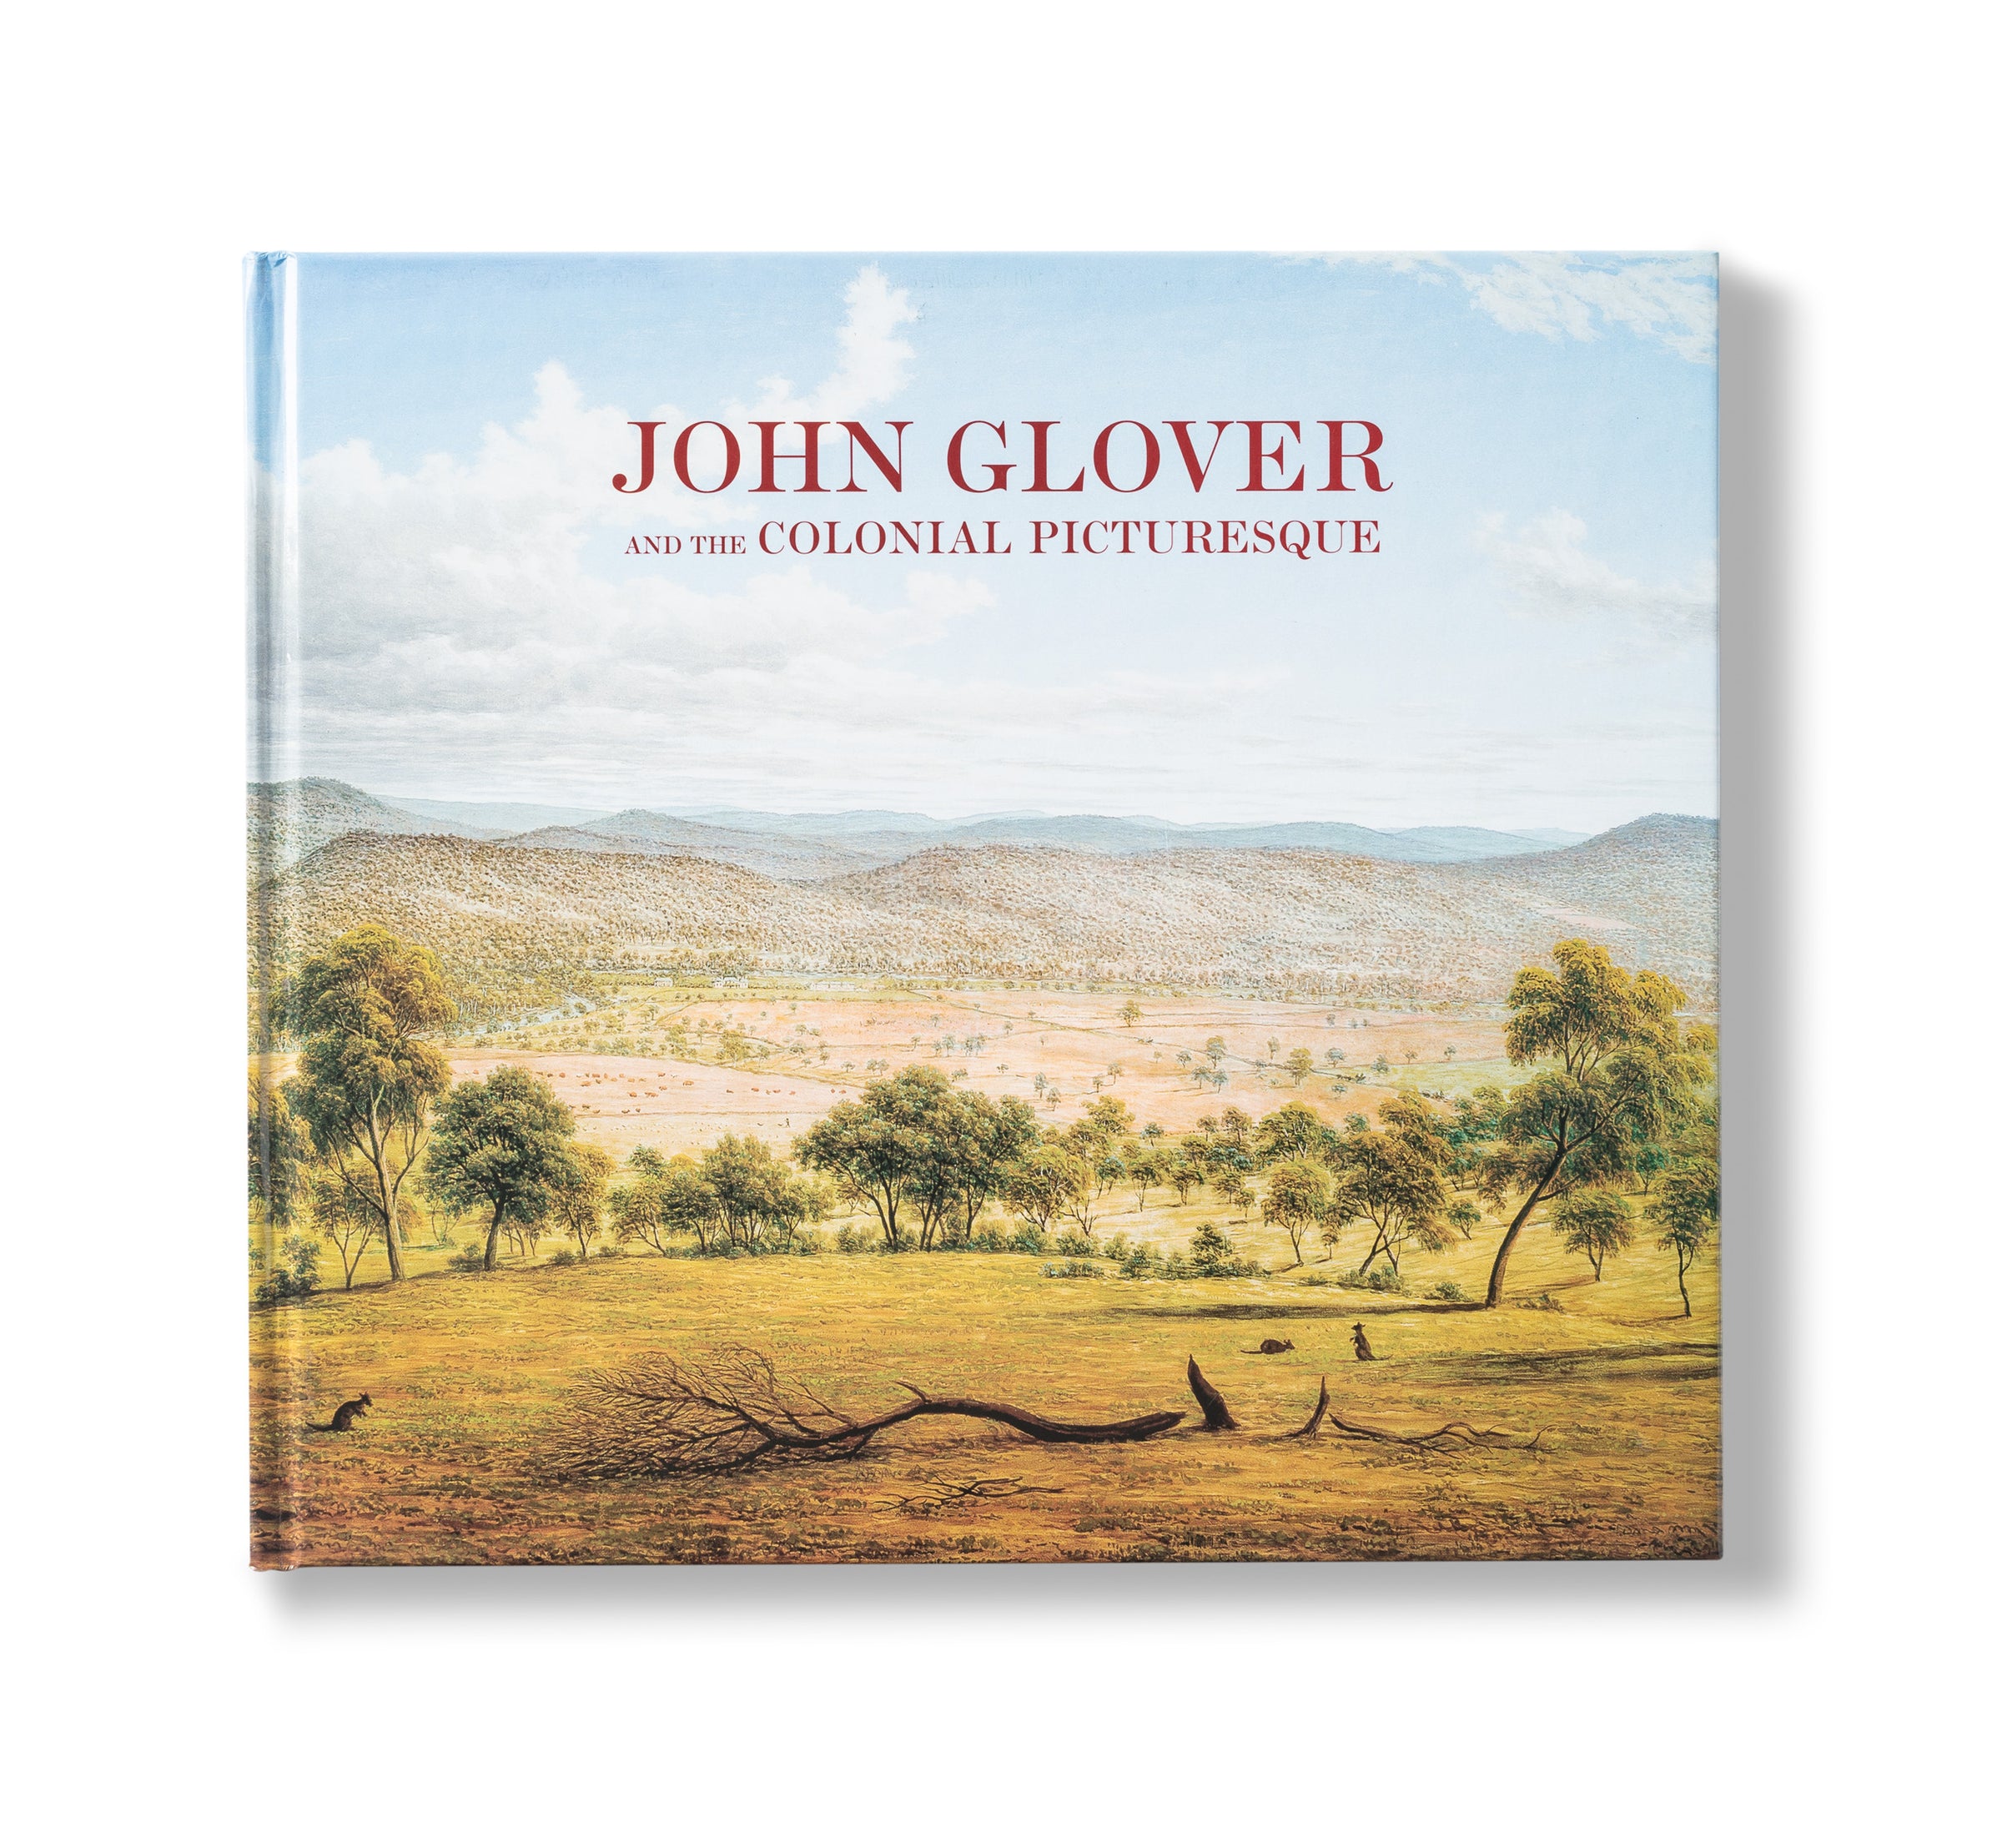 John Glover and the Colonial Picturesque Exhibition Catalogue